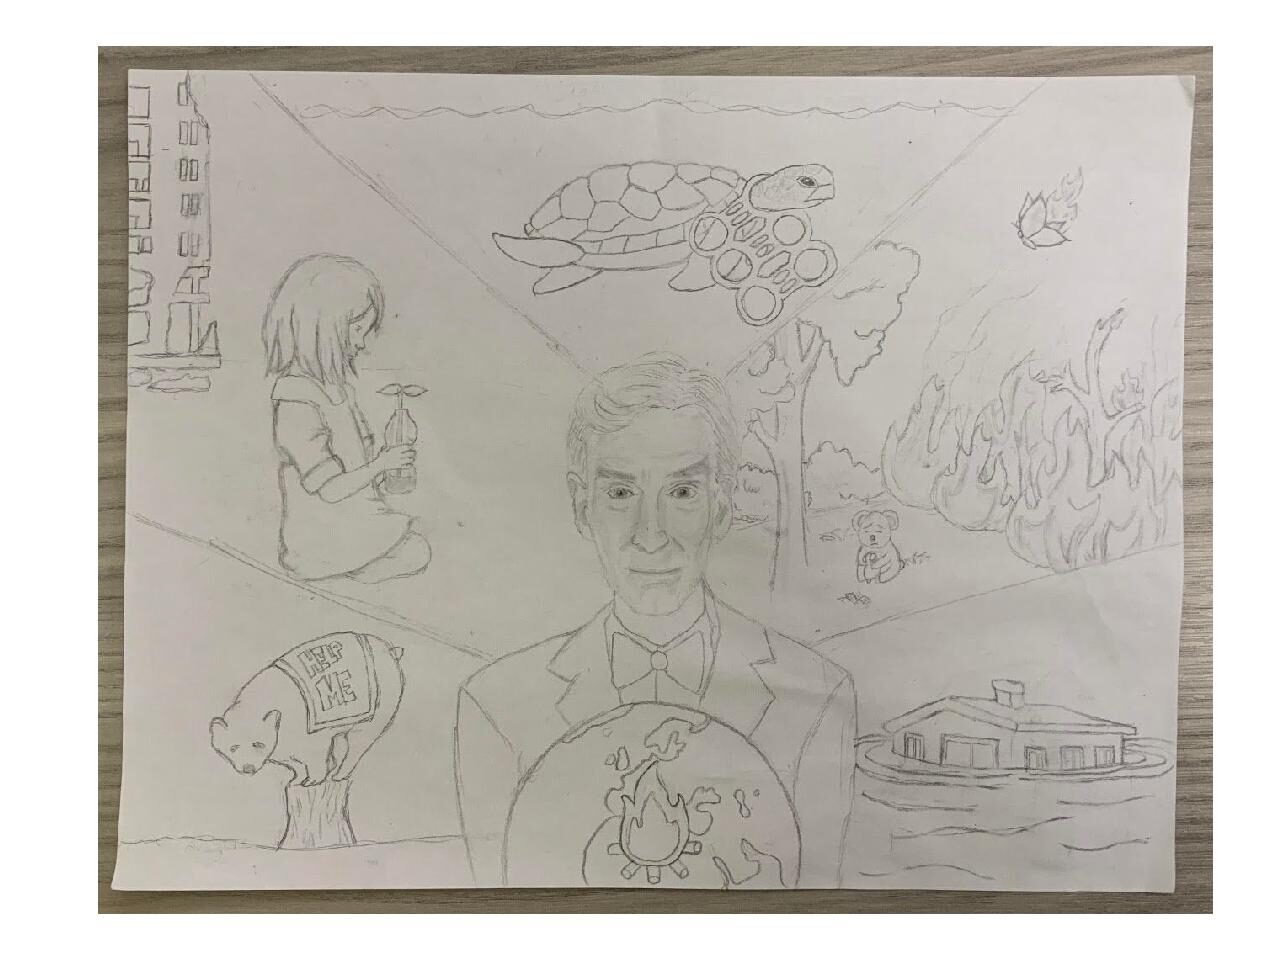 Mural sketch feautiring Bill Nye, a polar bear, a burning forestt, a sea turtle, a flooded house, and a girl planting a seedling.